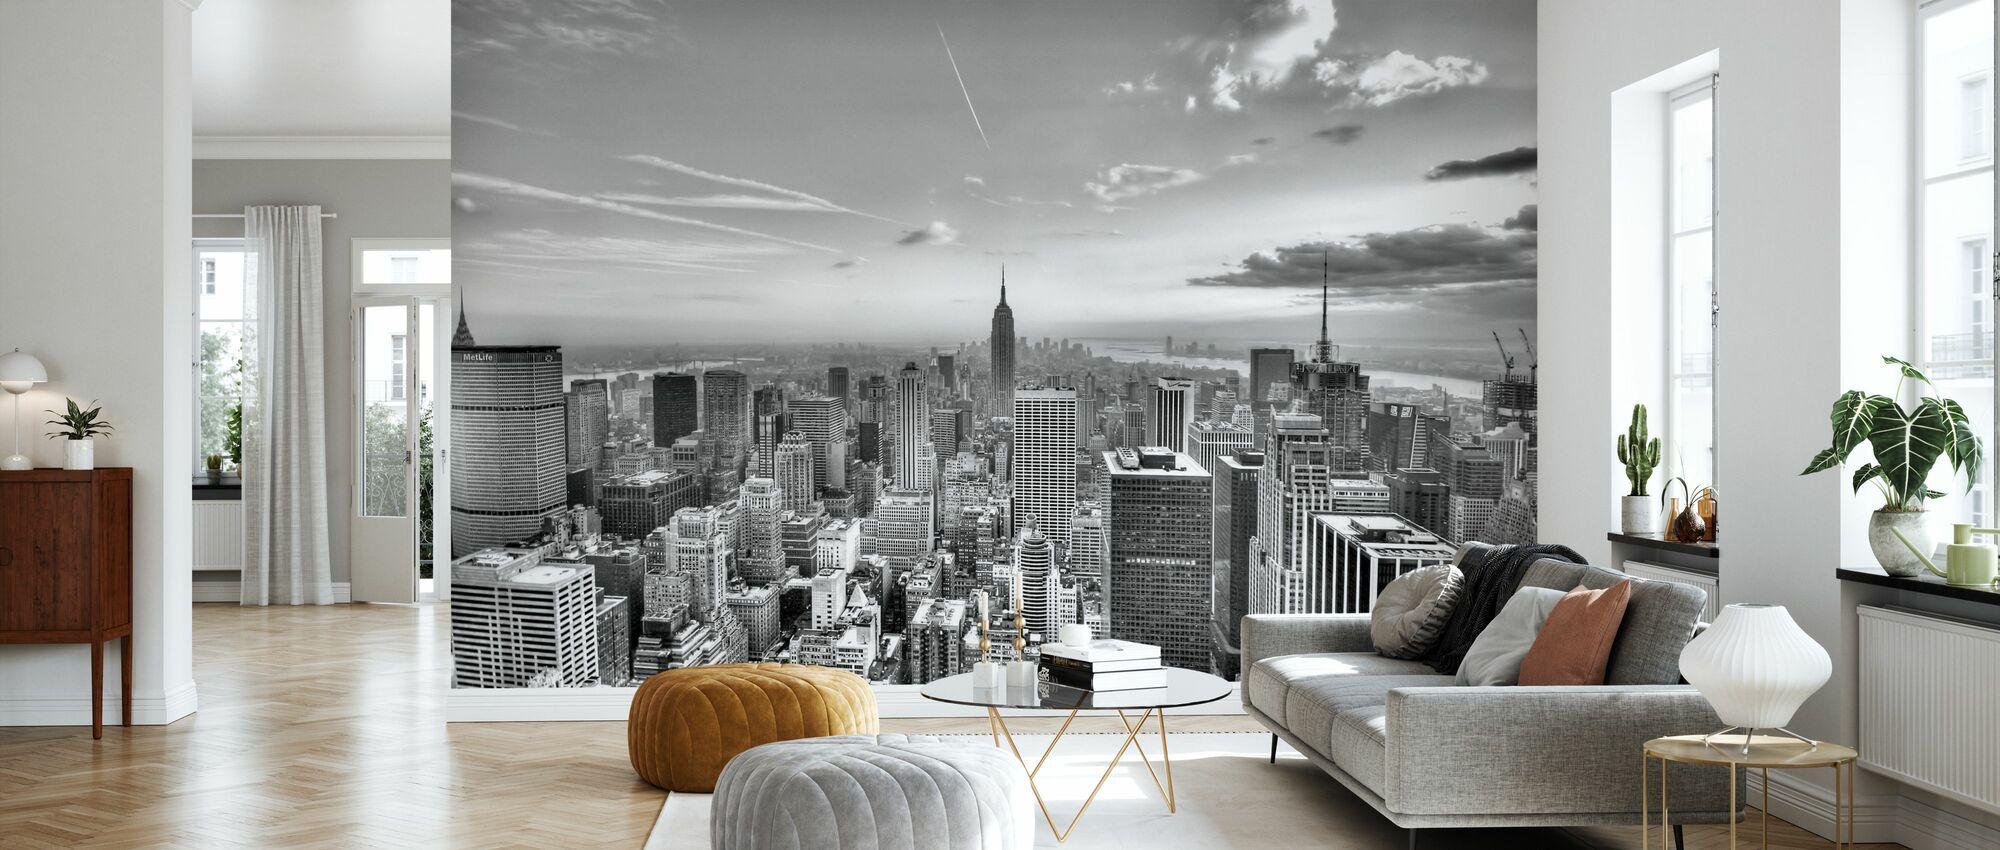 New York Apartment Wallpapers - Top Free New York Apartment Backgrounds ...